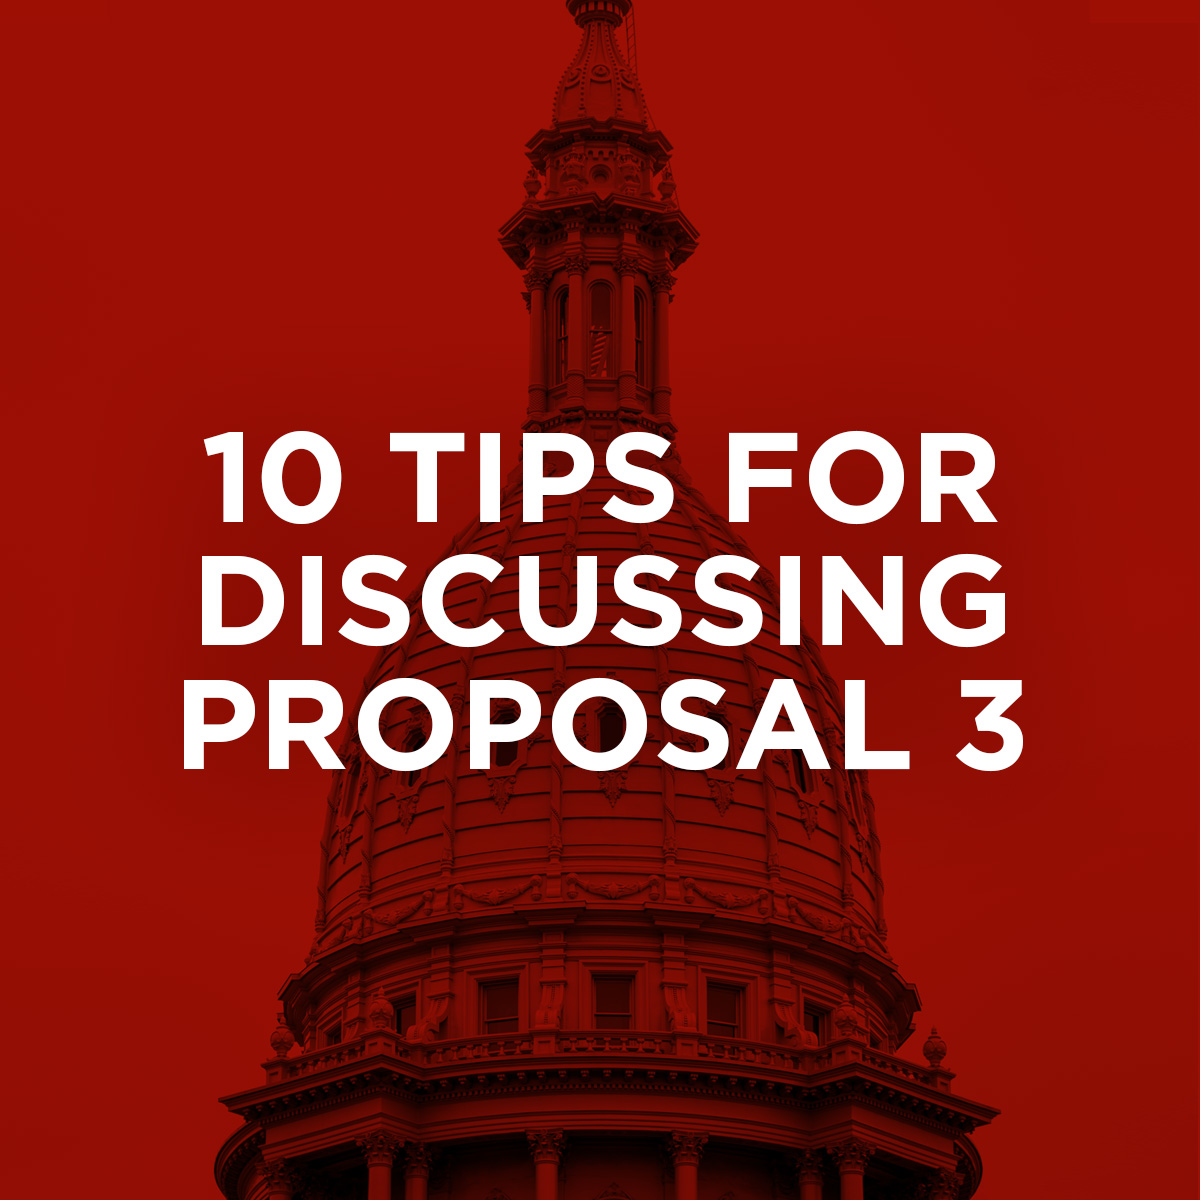 10 tips for discussing Proposal 3